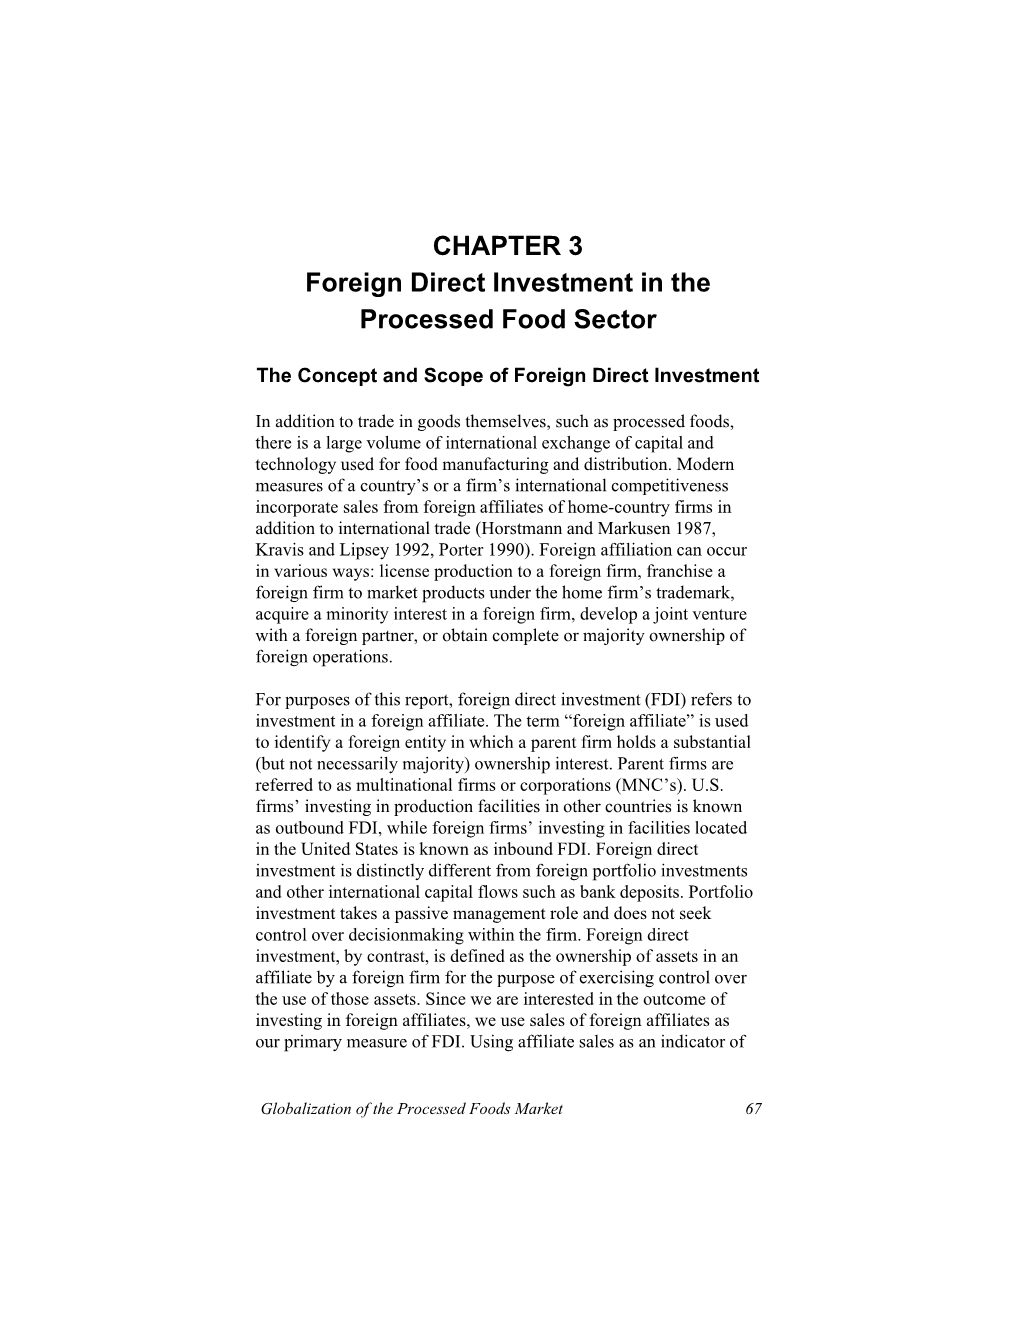 Foreign Direct Investment in the Processed Food Sector